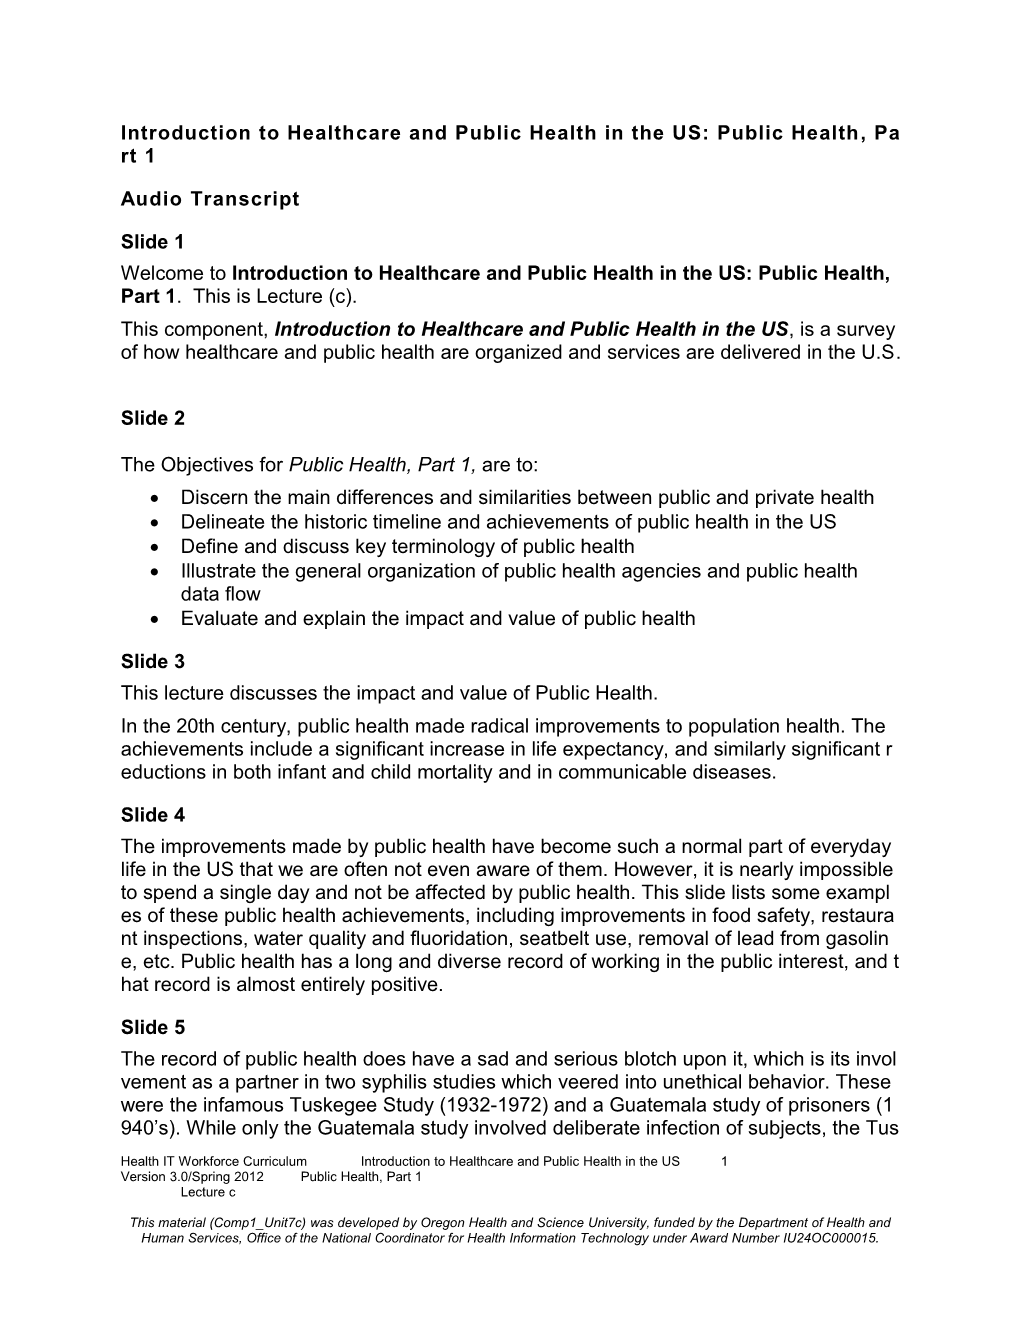 Introduction to Healthcare and Public Health in the US: Public Health, Part 1